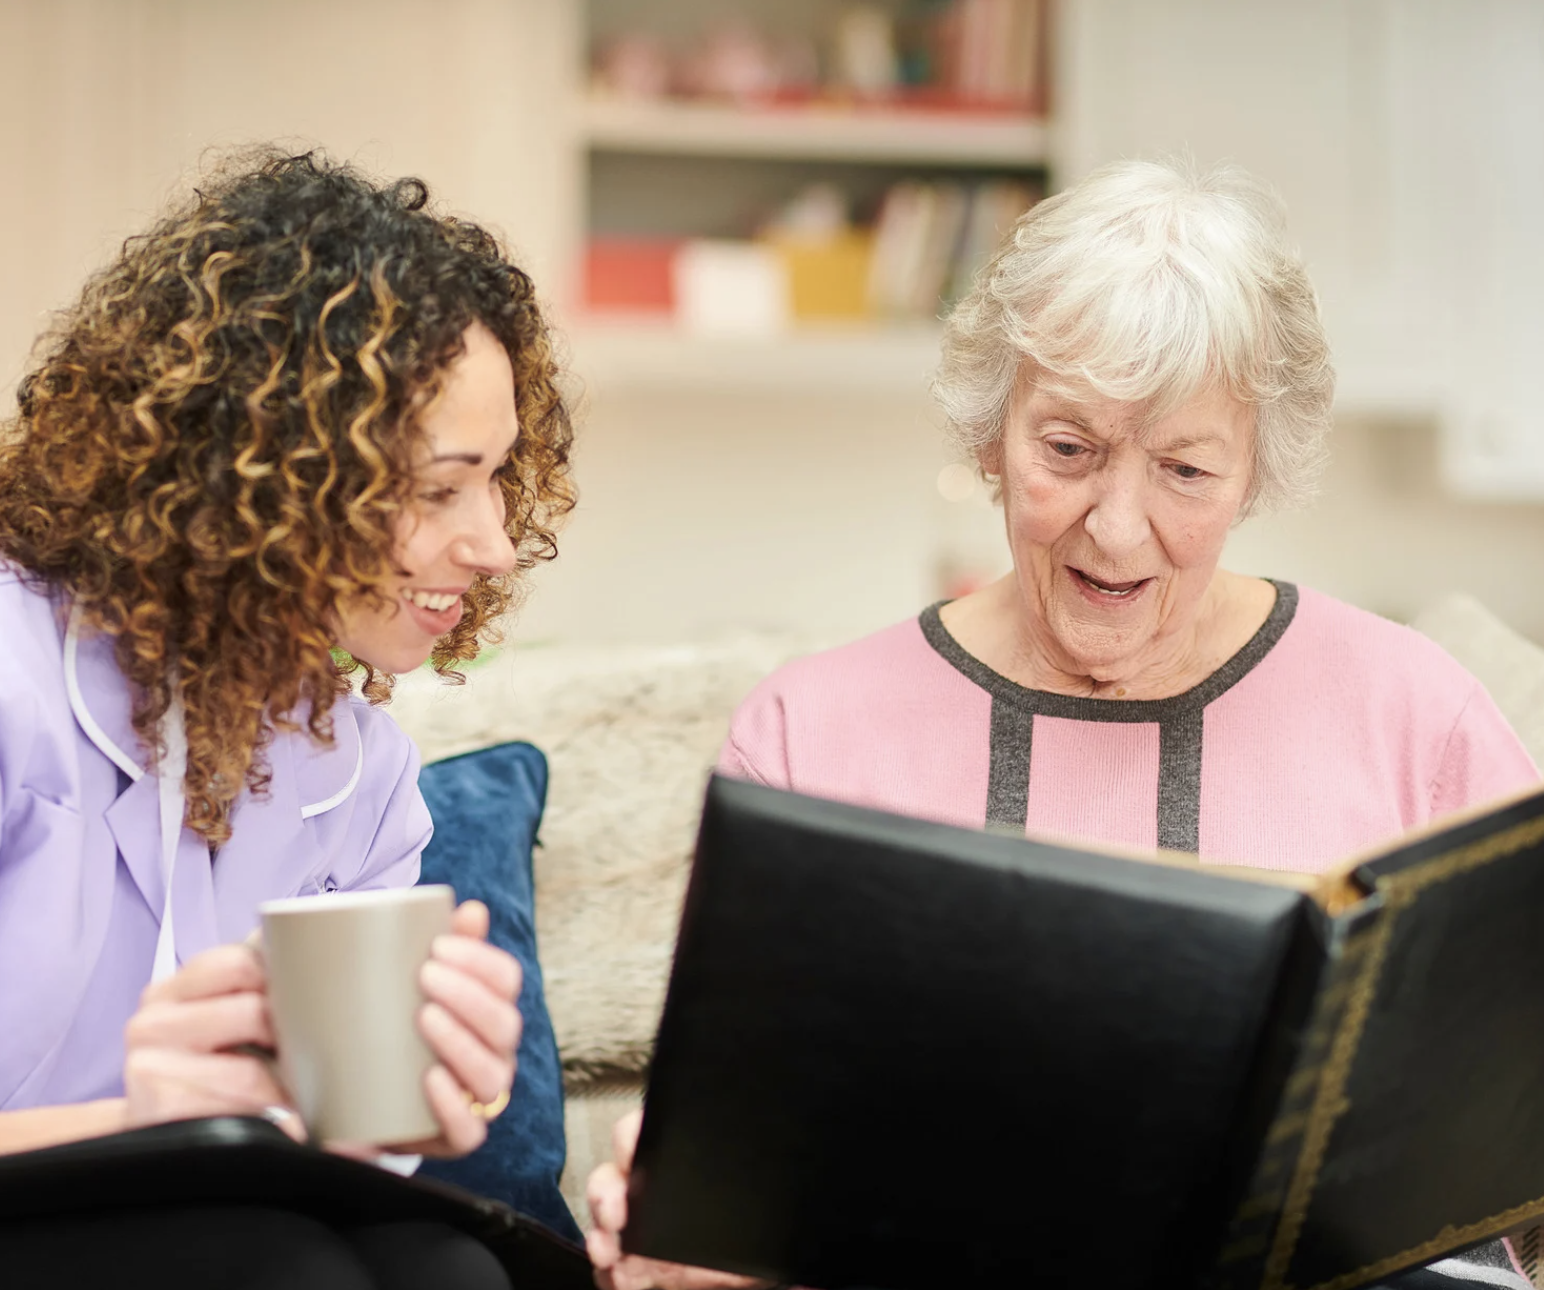 5 Things to Look for in Memory Care Community